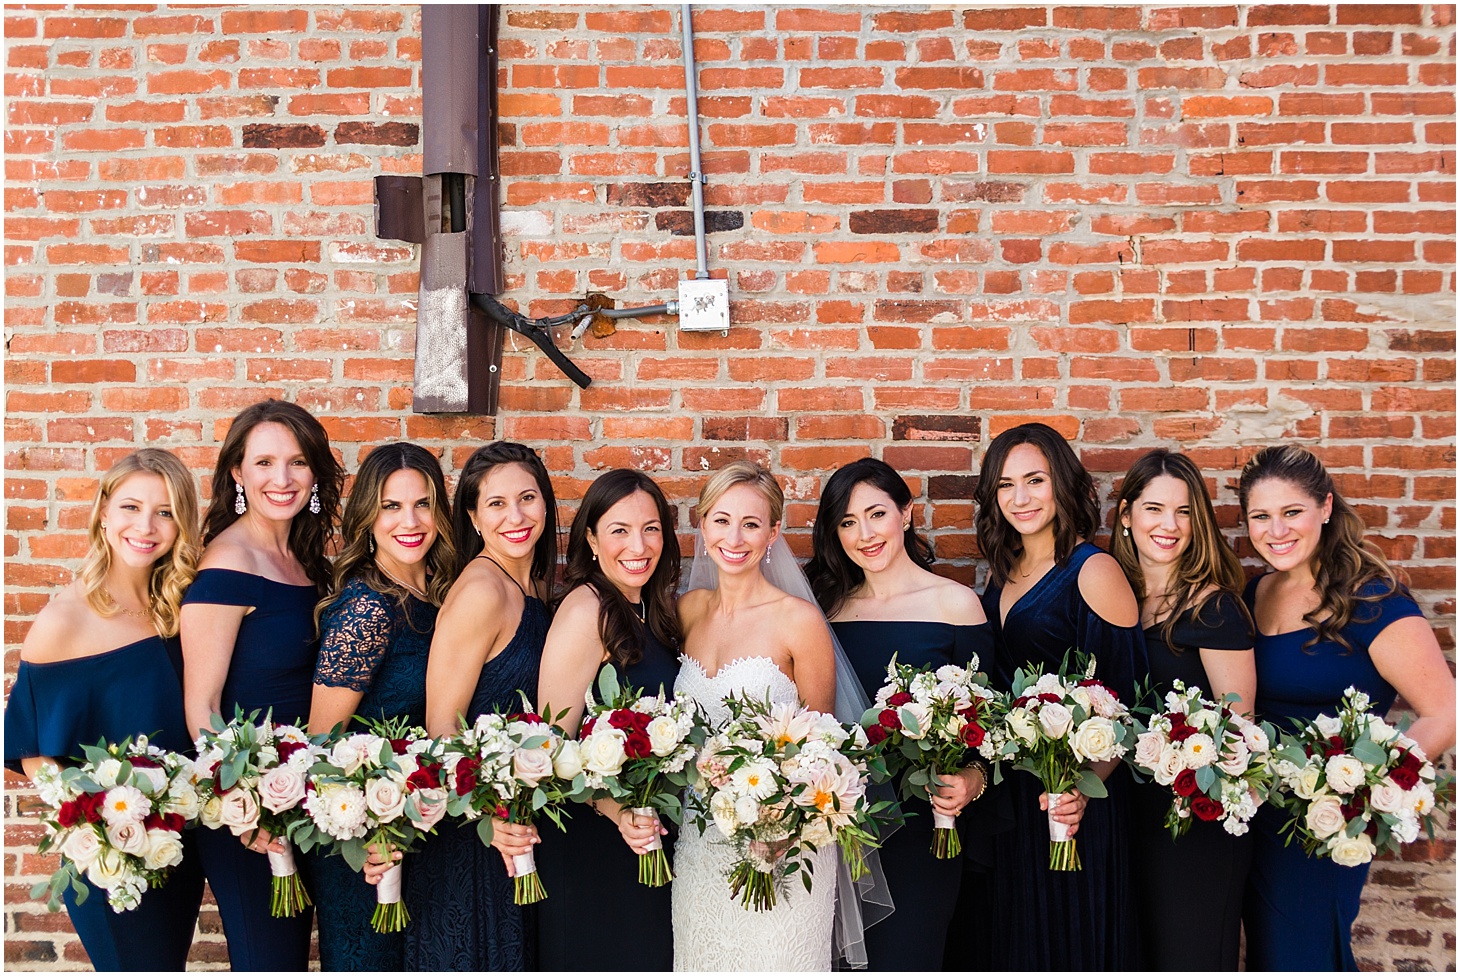 Wedding Party Portraits at Long View Gallery, Industrial-Chic Wedding in DC, Sarah Bradshaw Photography, DC Wedding Photographer